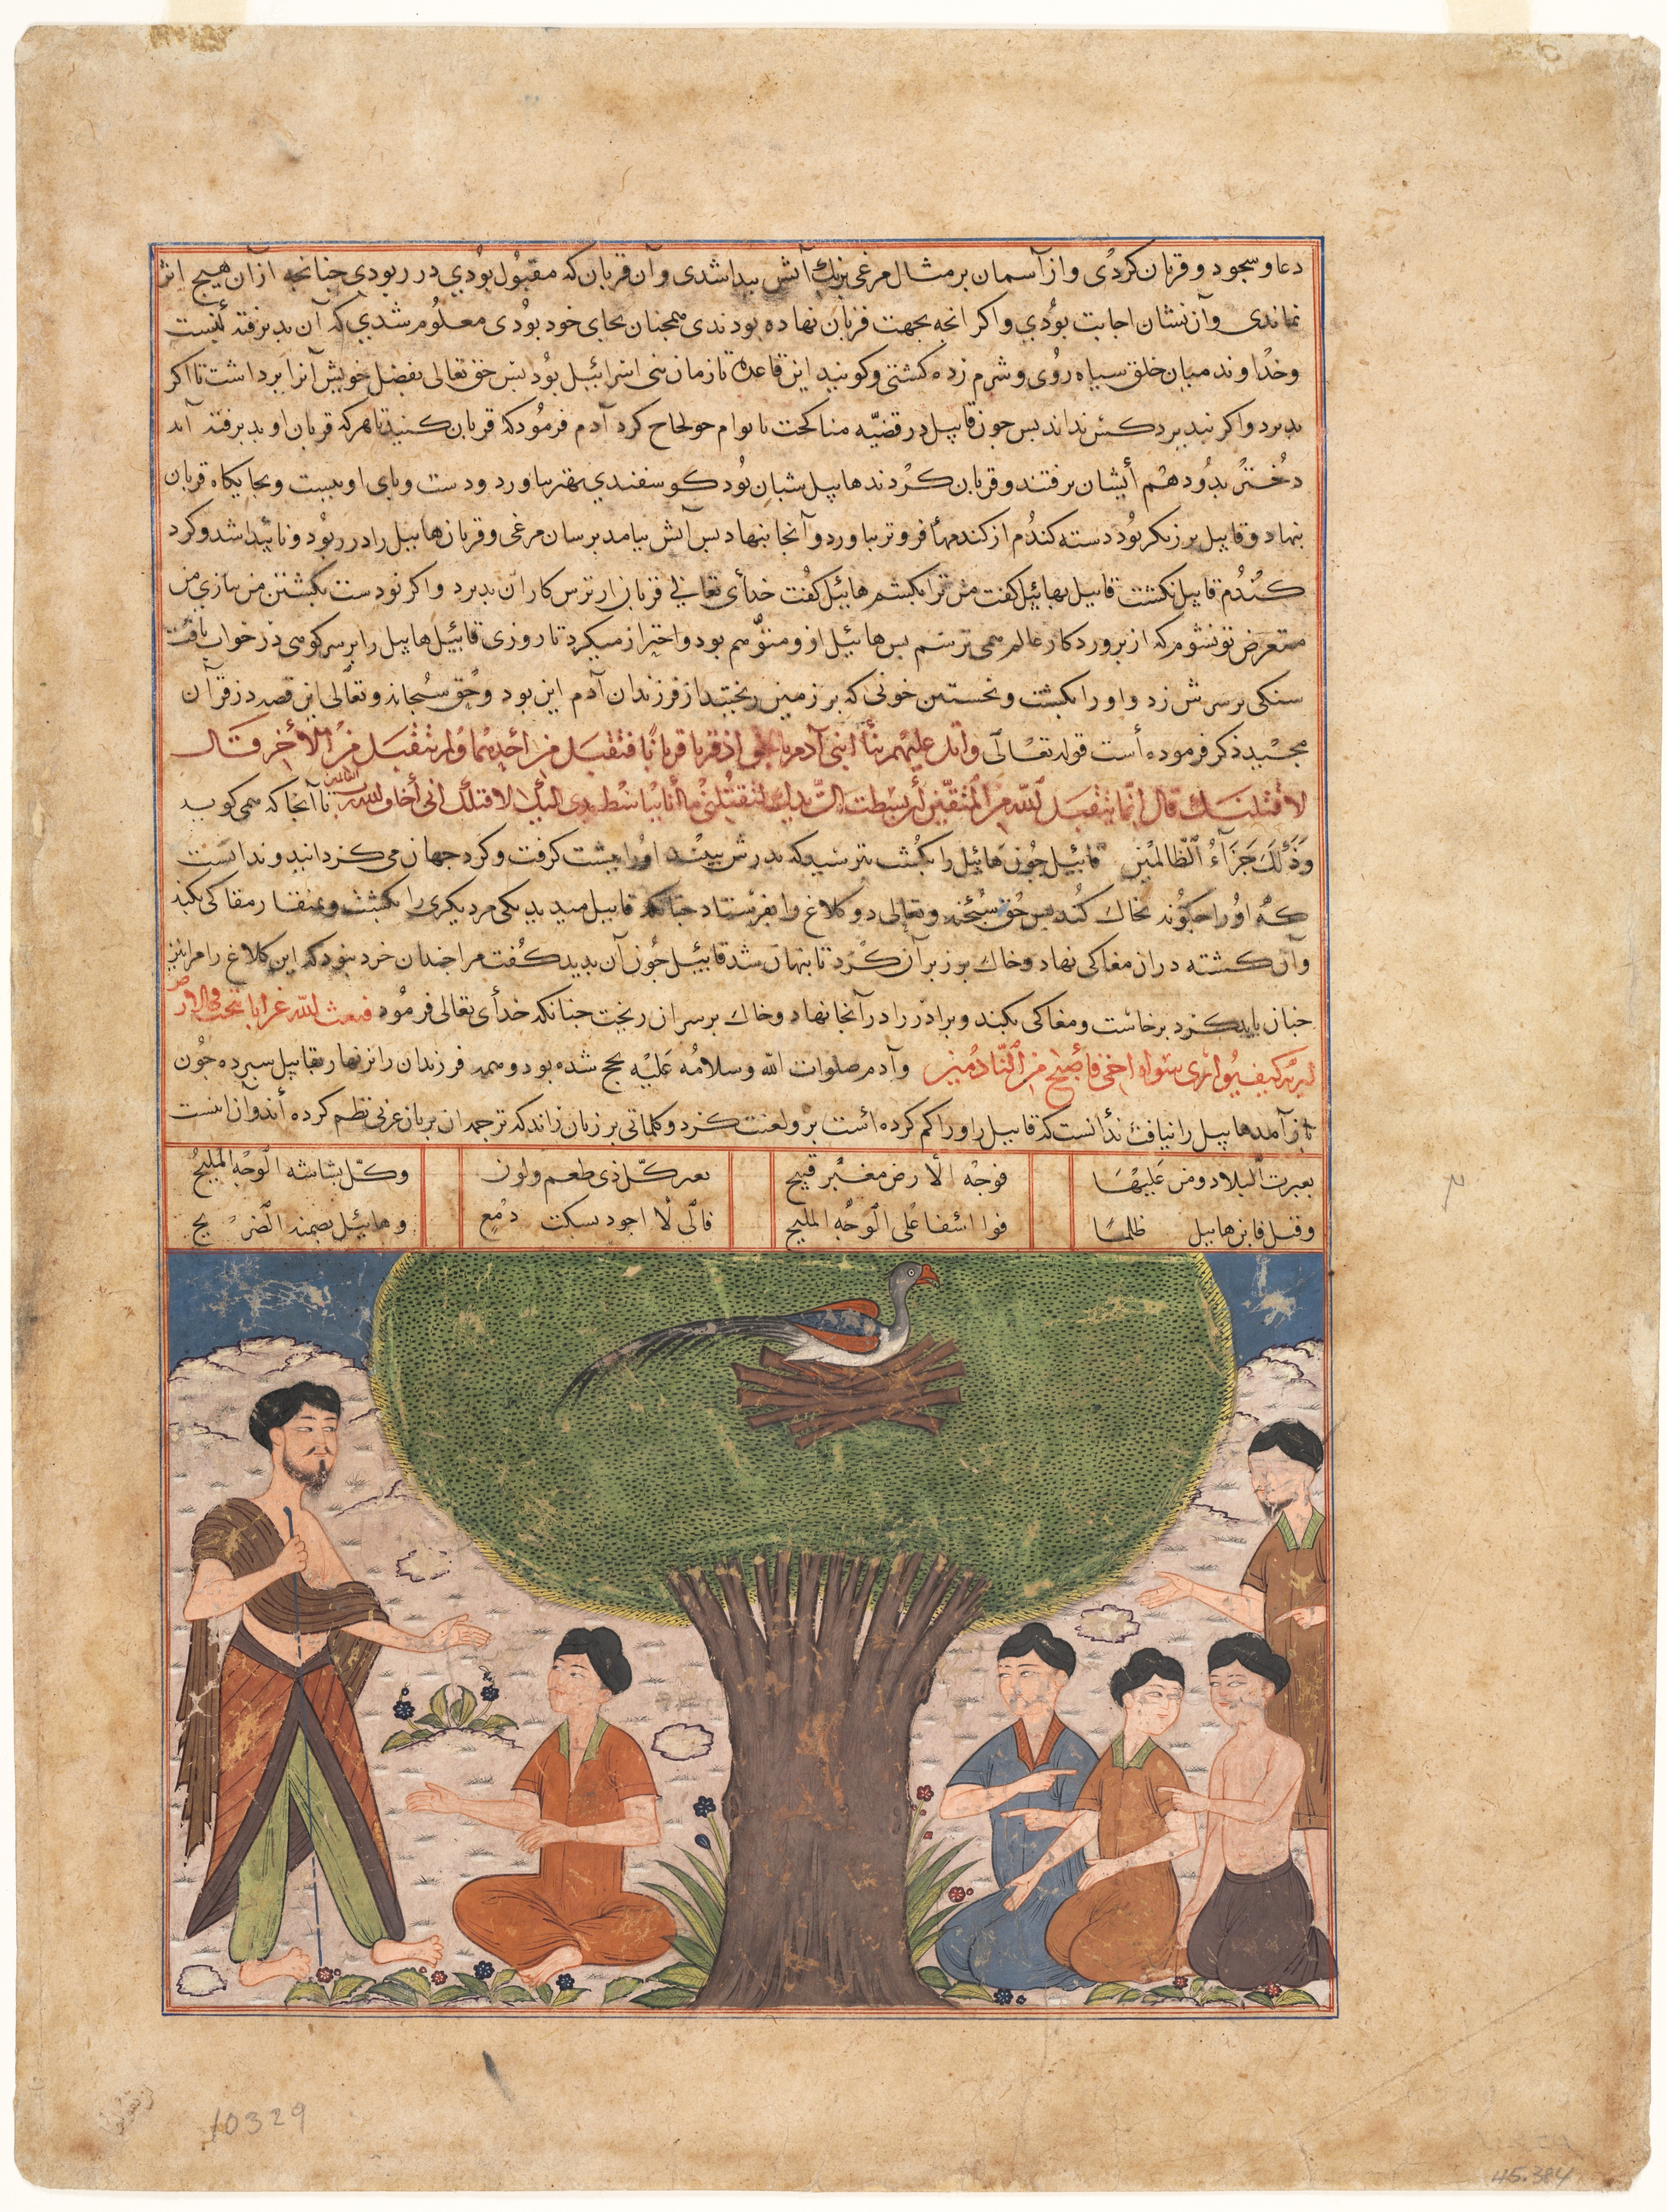 The Story of Adam, peace upon him, his Sons and Progeny, from a Jami al-tavarikh (Compendium of Chronicles) of Rashid al-din (verso)